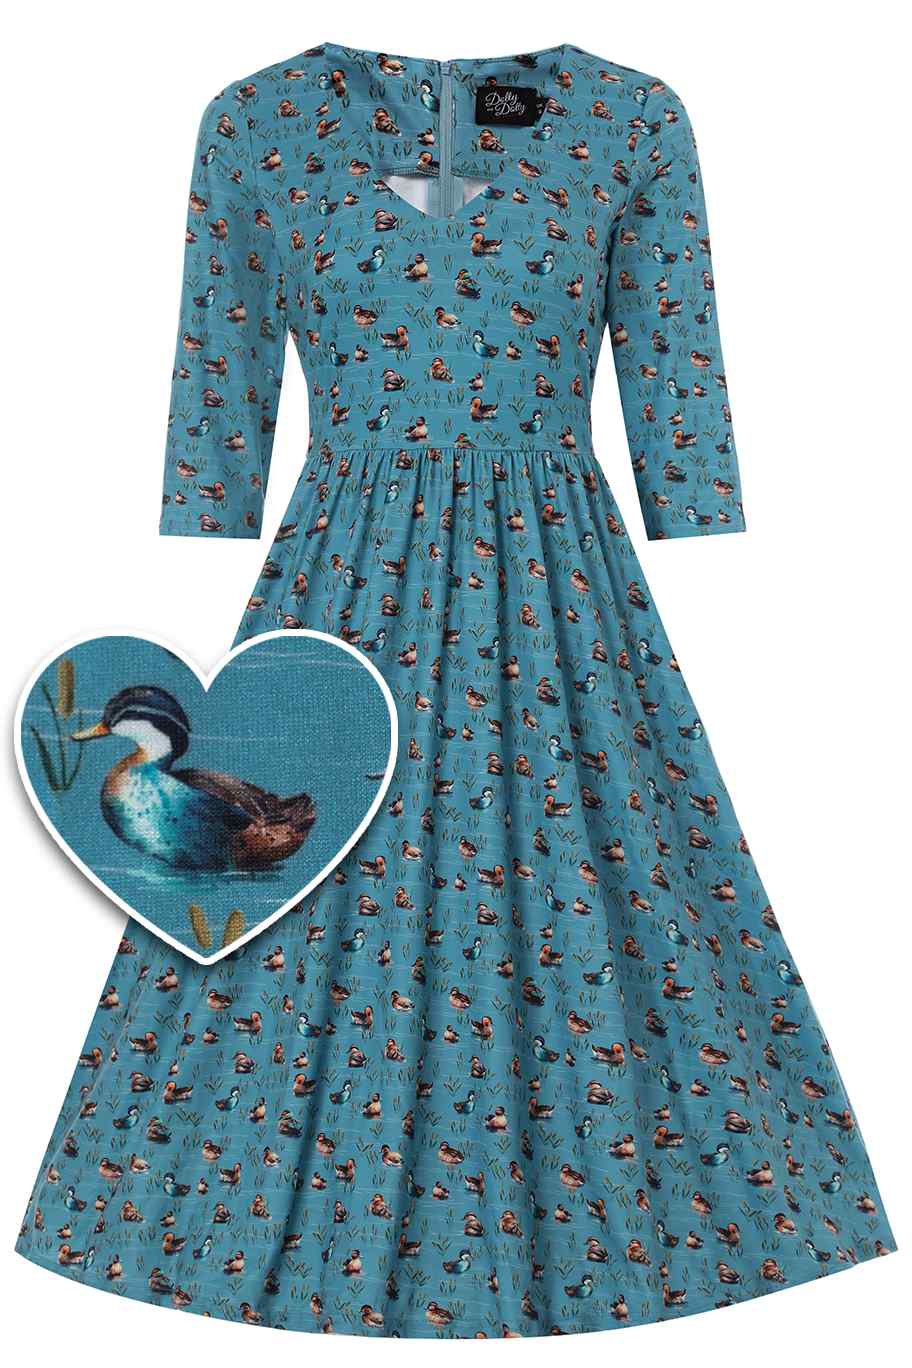 Front View of Duck Print Long Sleeved Swing Dress in Blue